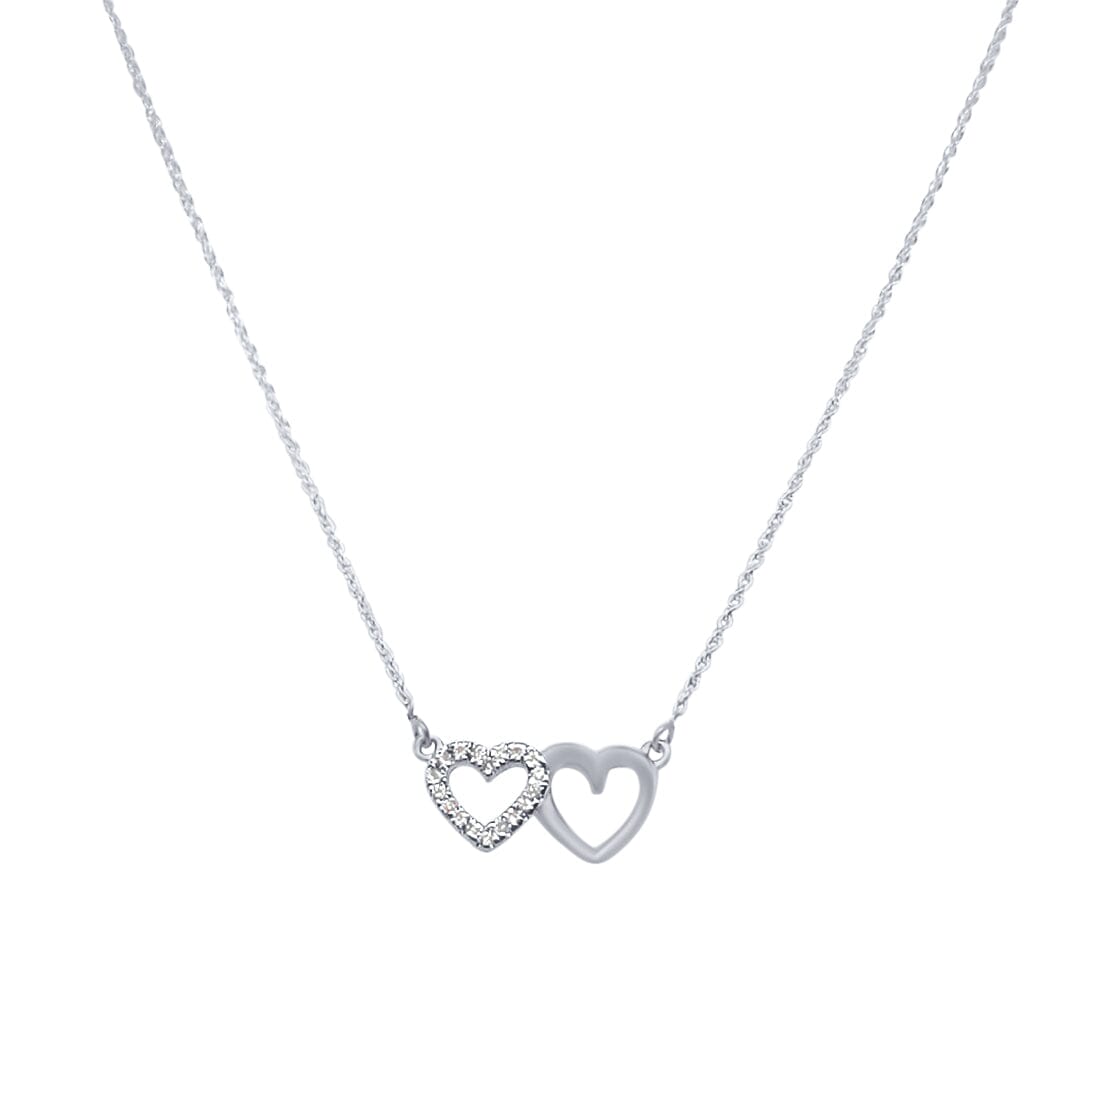 42cm Double Open Heart Necklace with Cubic Zirconia in Sterling Silver Necklaces Bevilles 